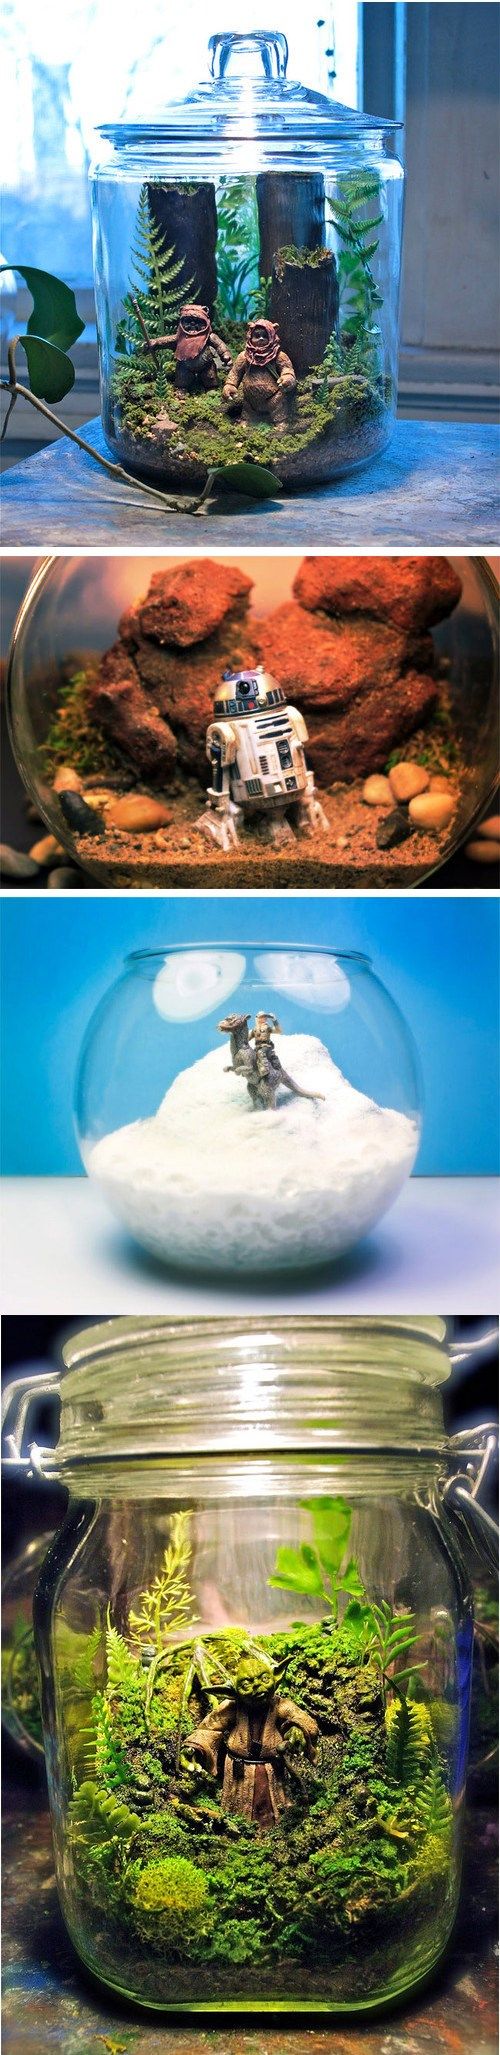 Awesome Star Wars terrariums